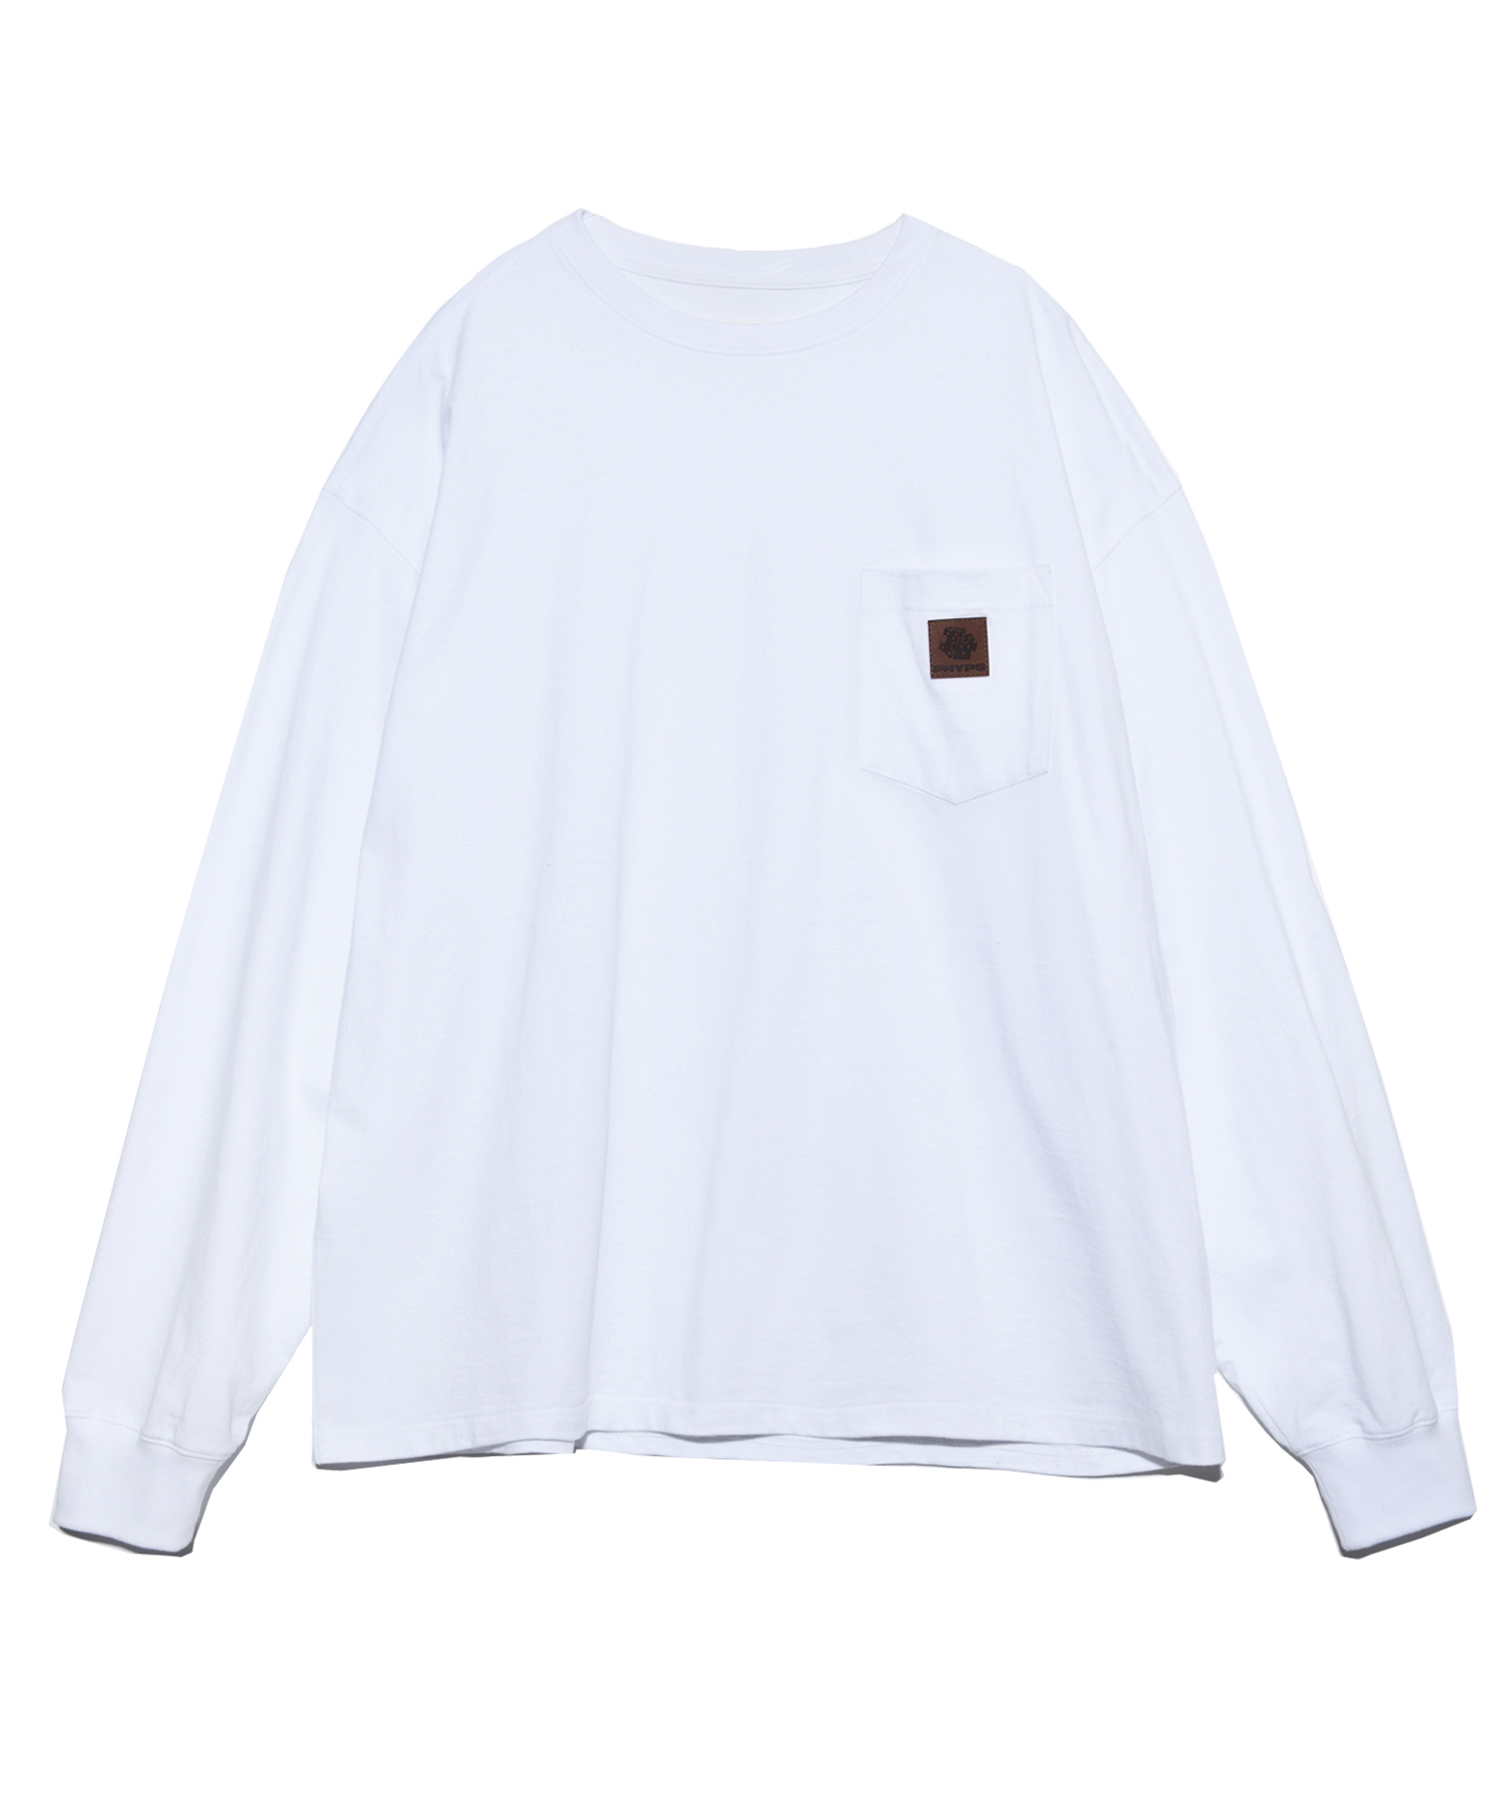 PHYPS® DOUBLE LABEL LONG SLEEVE WHITE